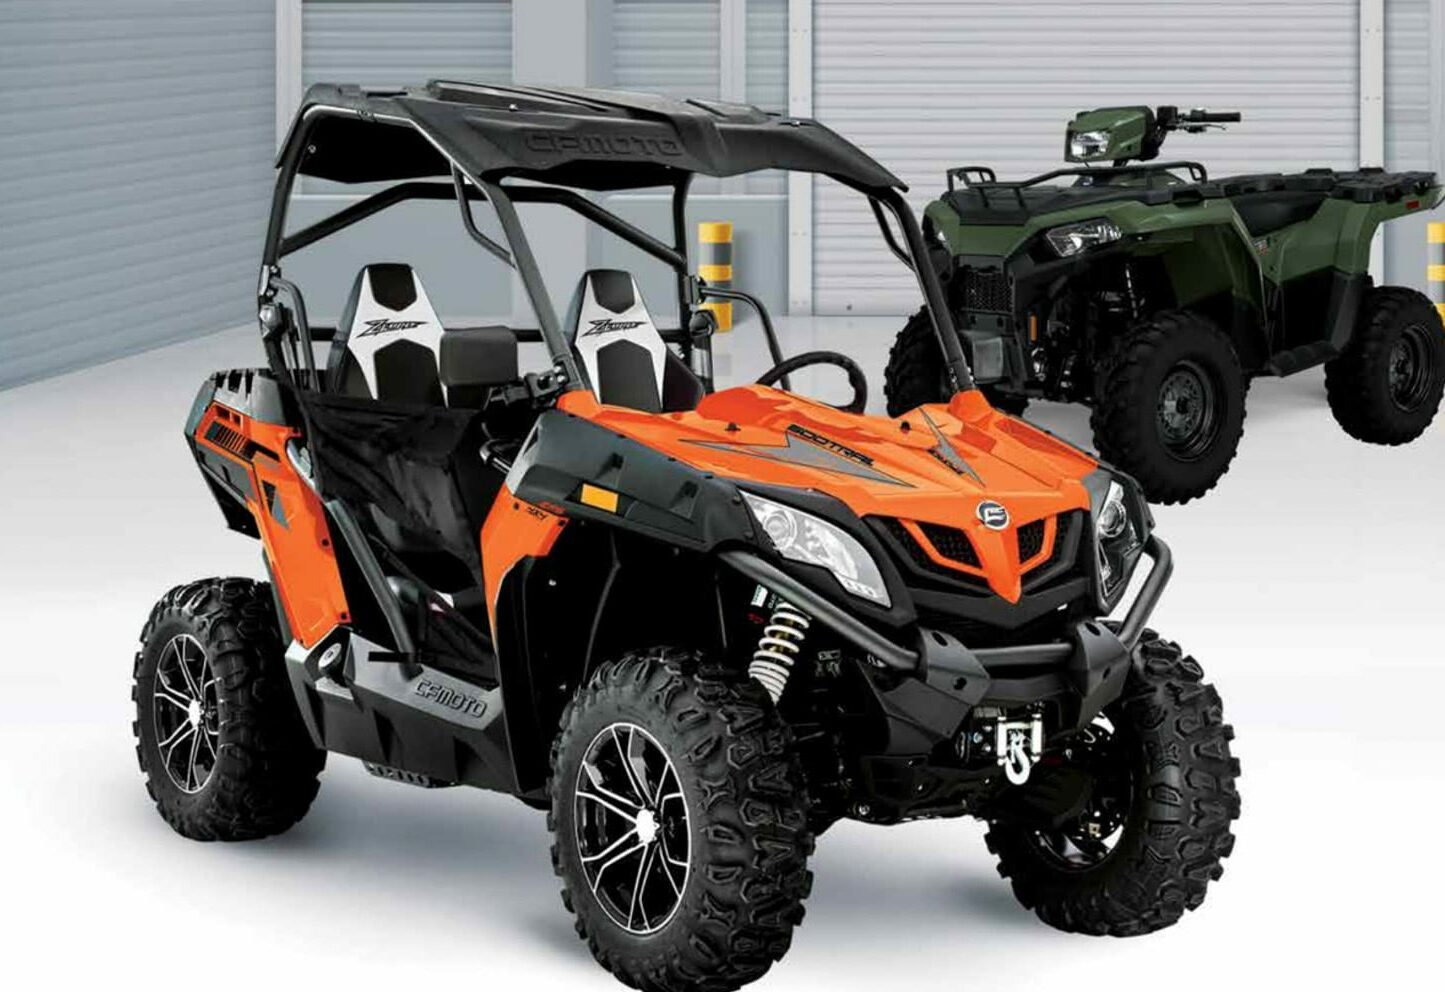 Unfairly overlooked entry-level quads